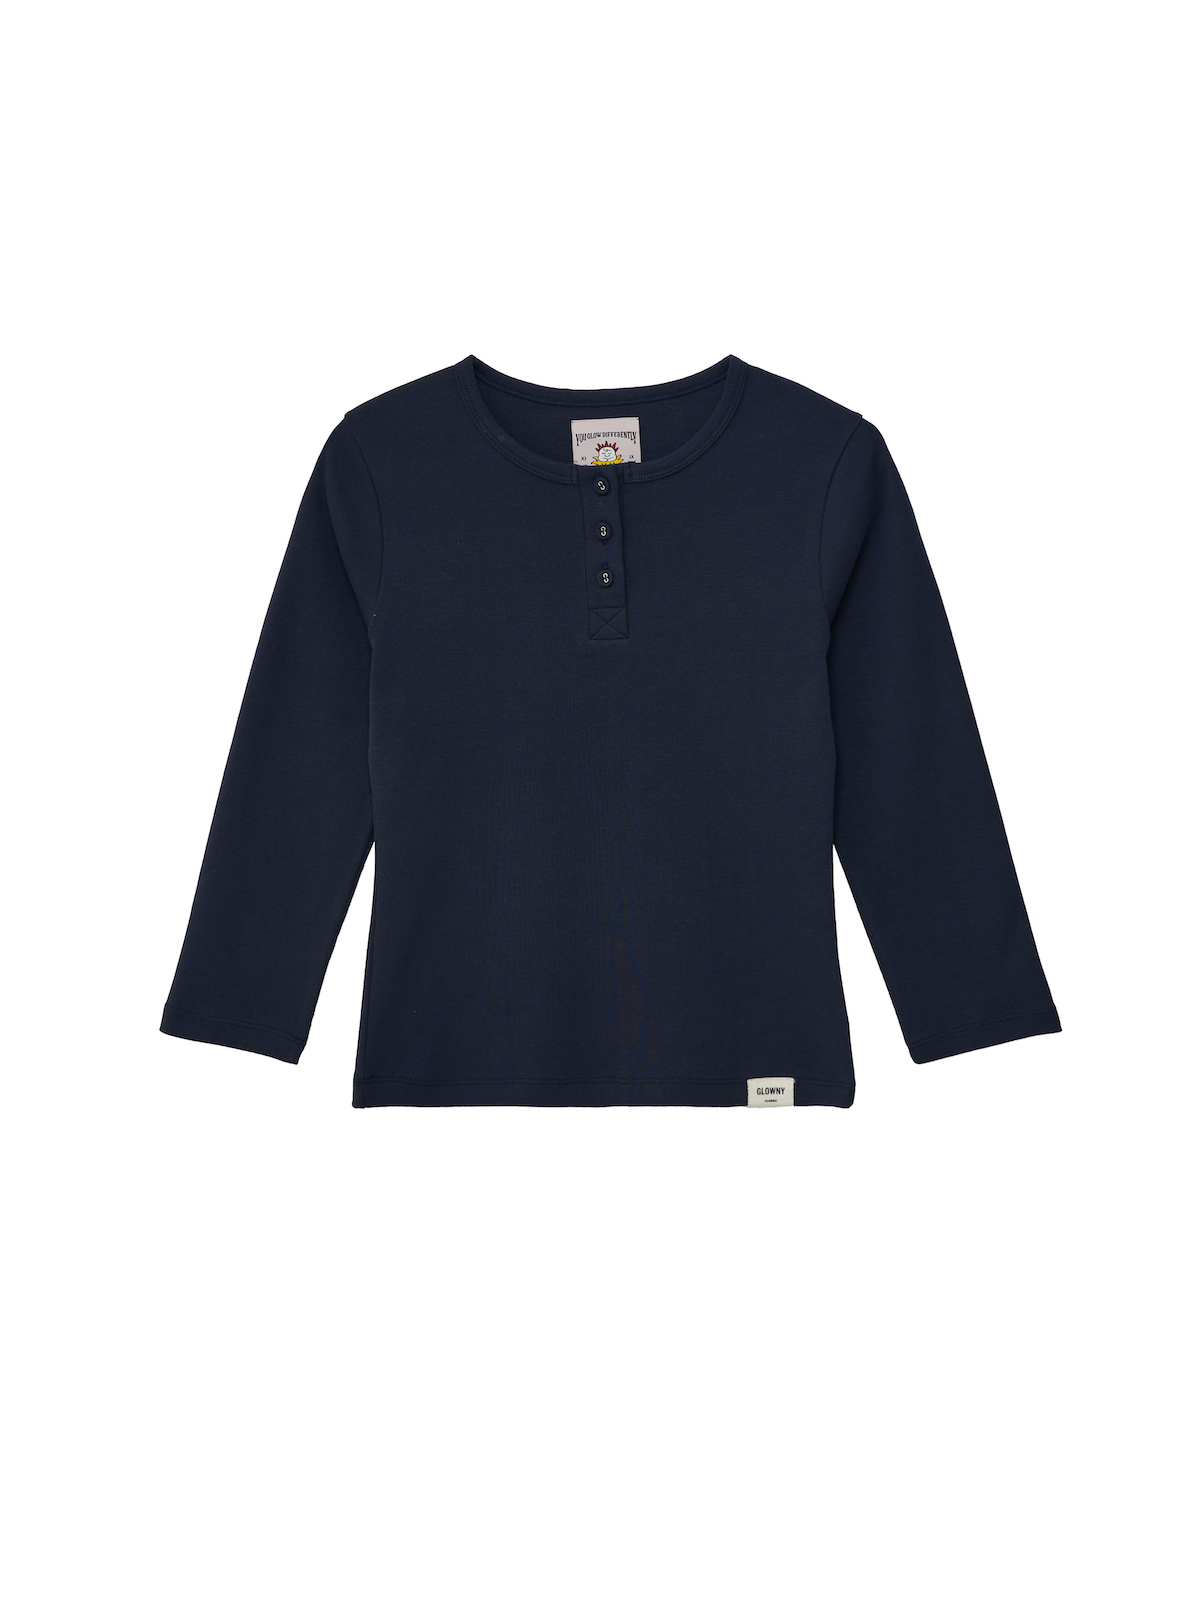 3/4 BUTTON FLY TEE (NAVY)